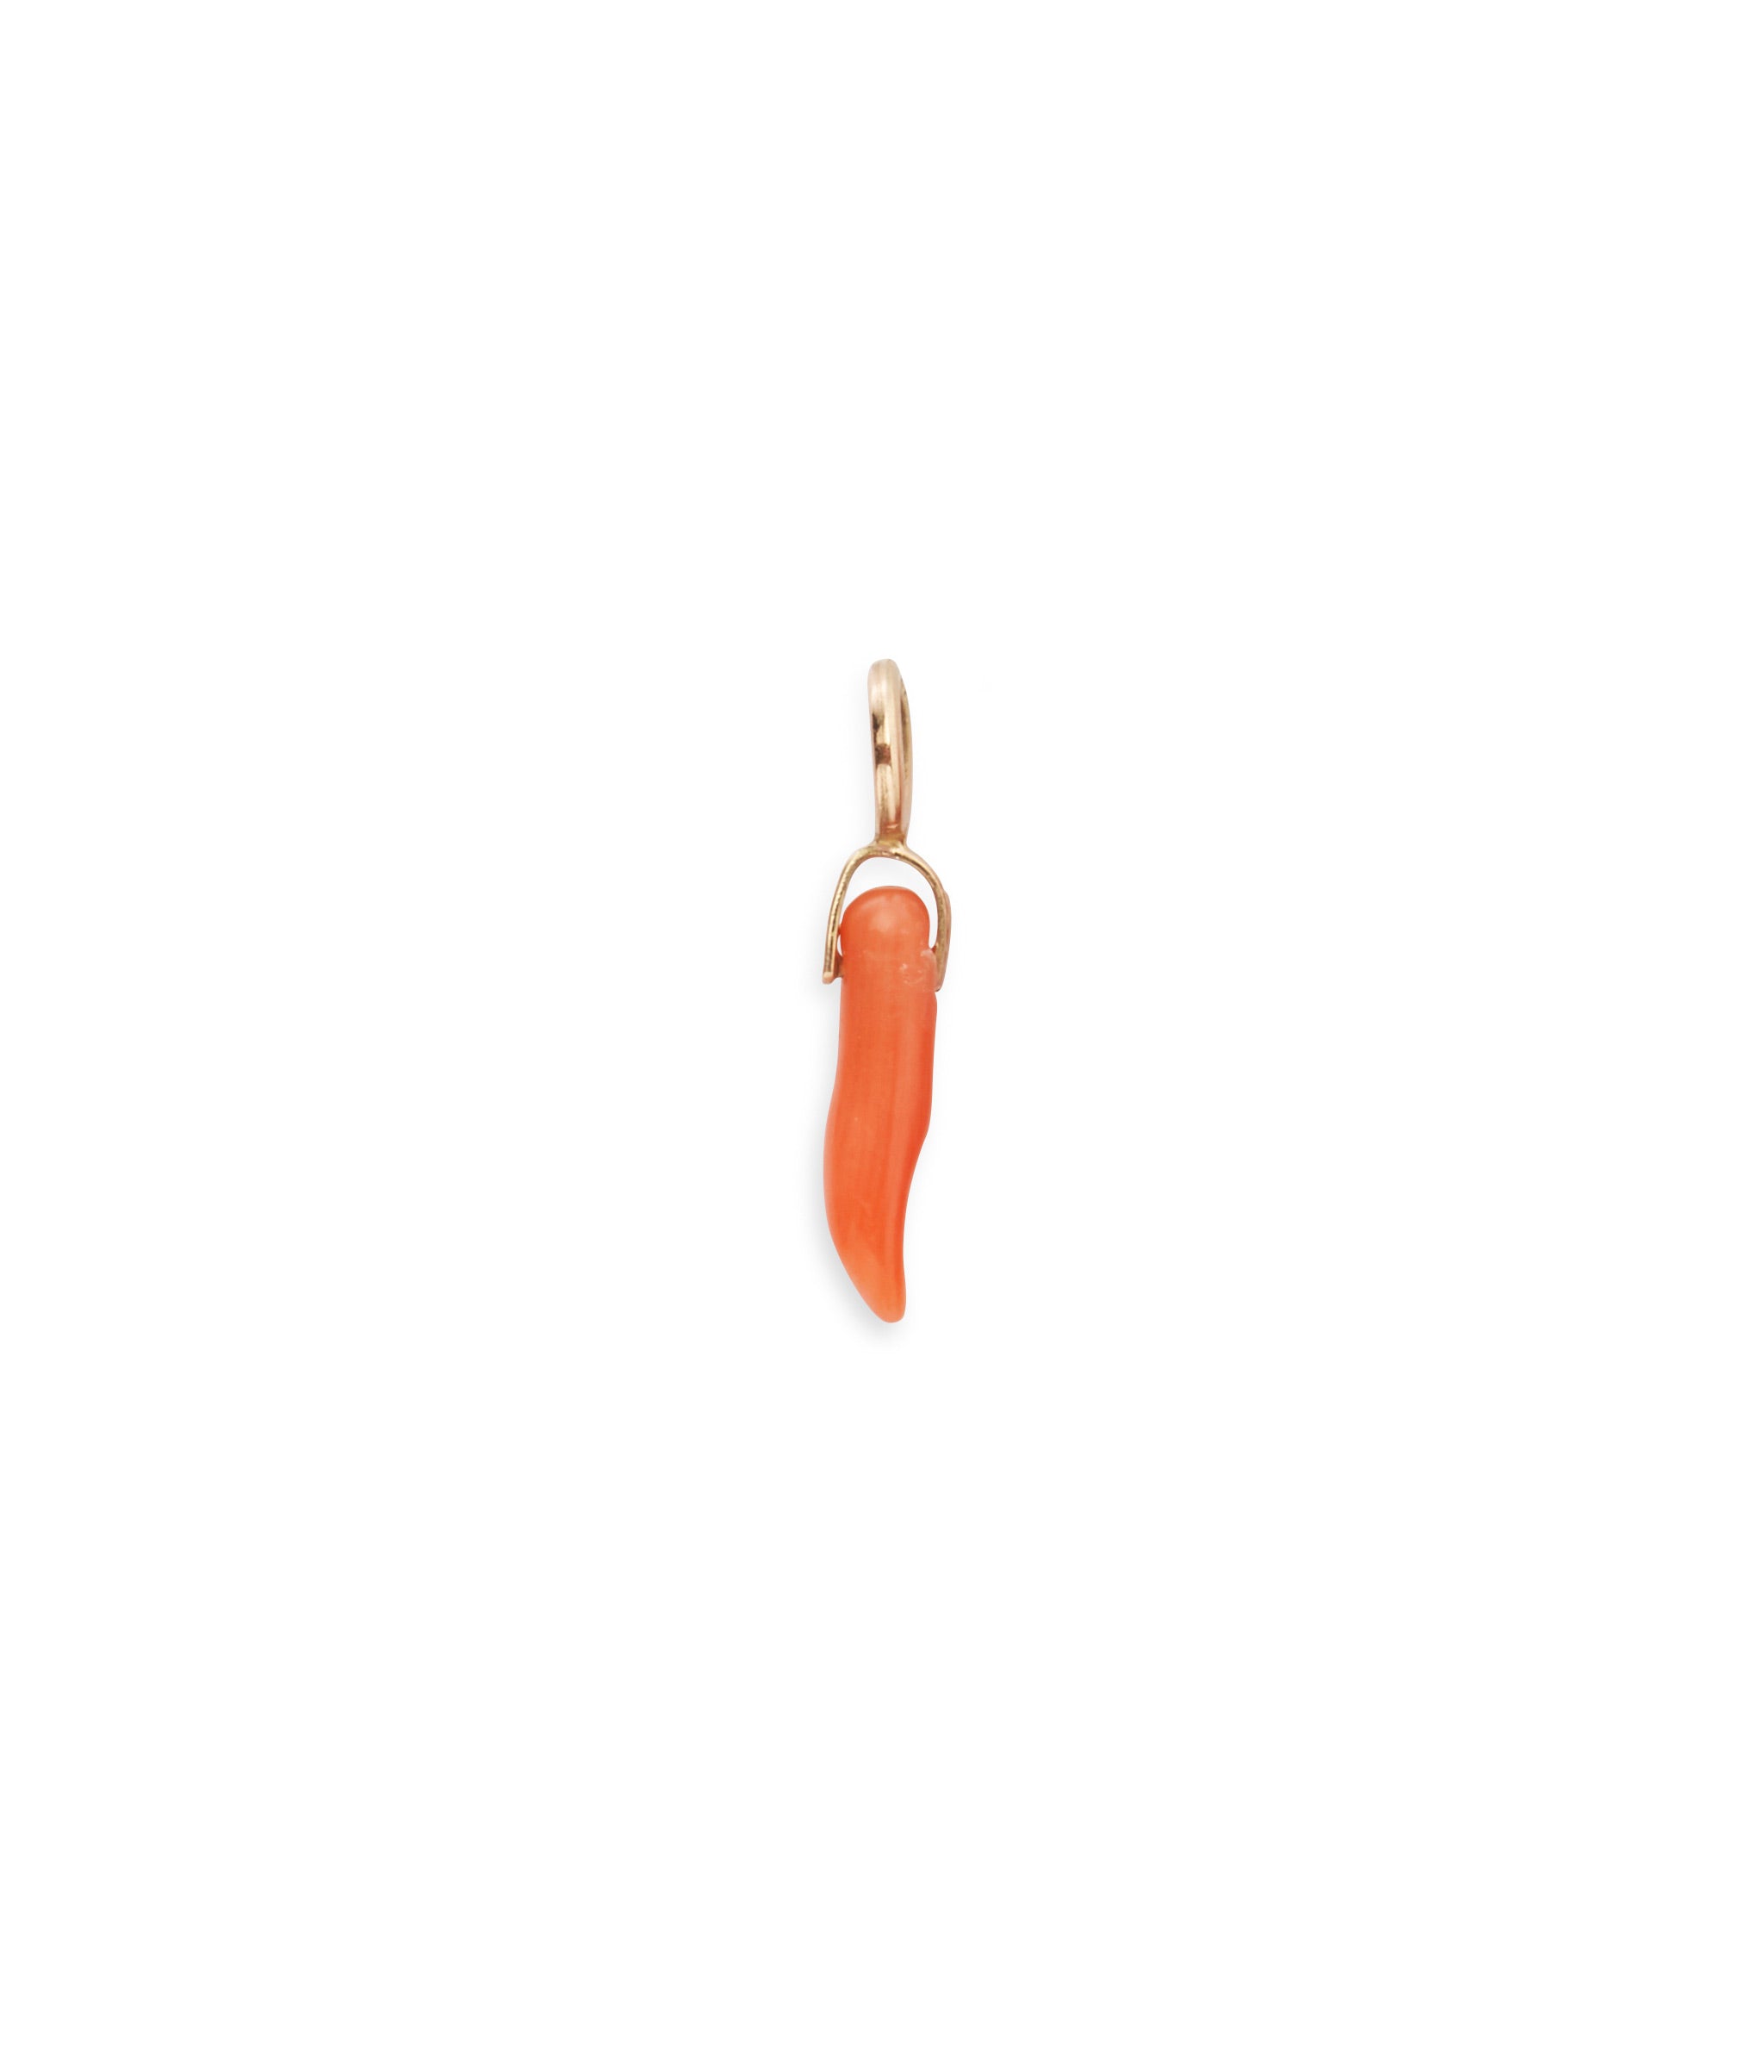 Coral Horn 14K Necklace Charm. Pink coral horn necklace charm with 14k gold bale and ring.